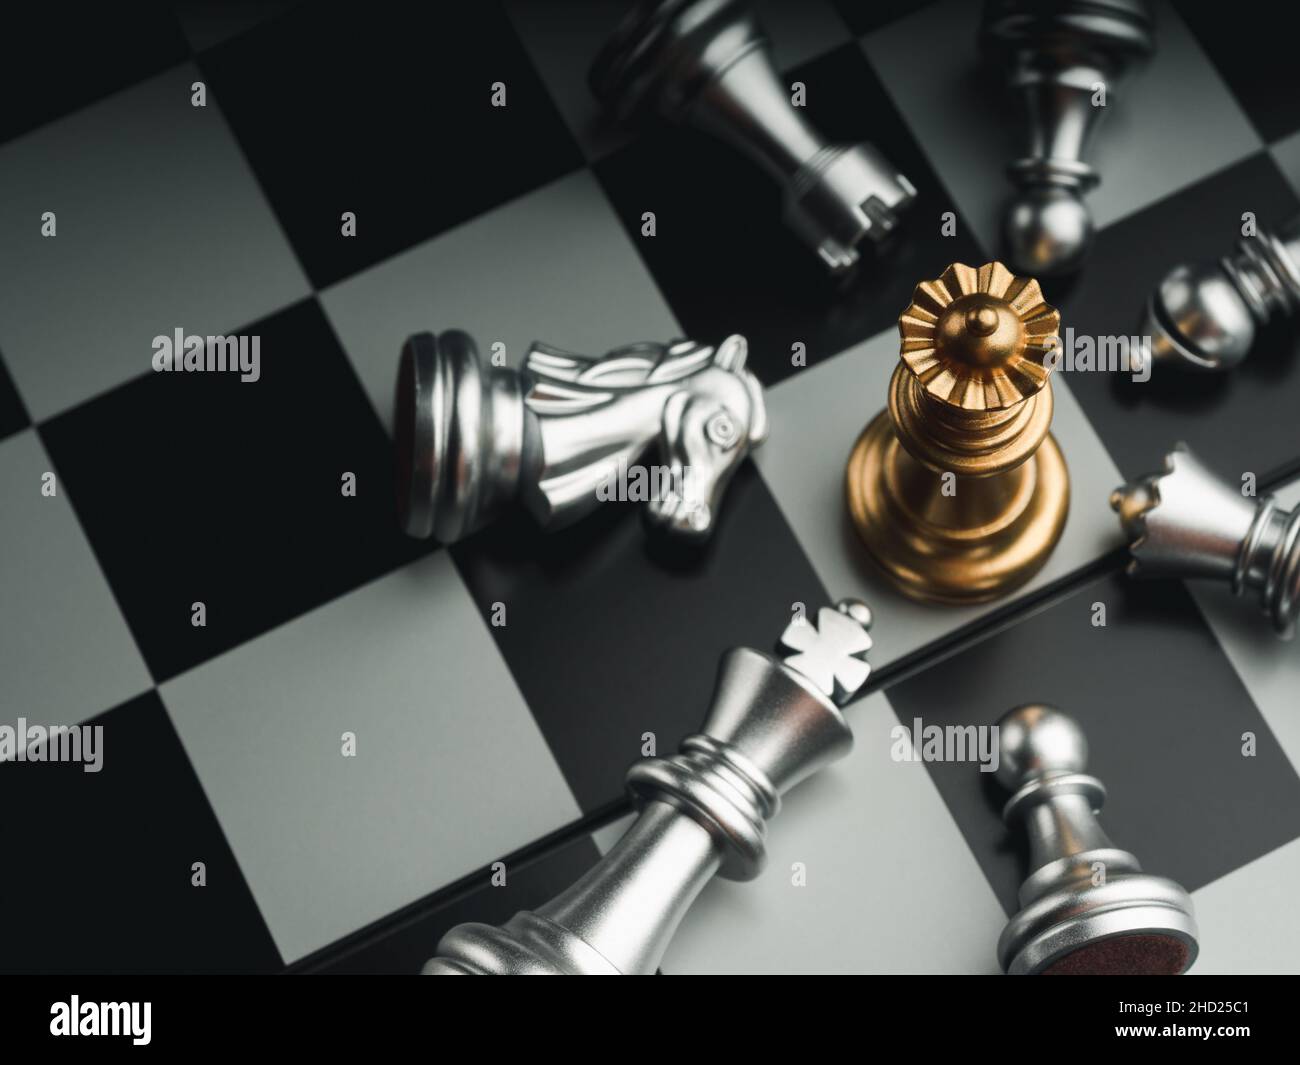 The golden queen chess piece standing with falling silver knight, rook, bishop, pawn pieces on chessboard on dark background, top view. Leadership, wi Stock Photo